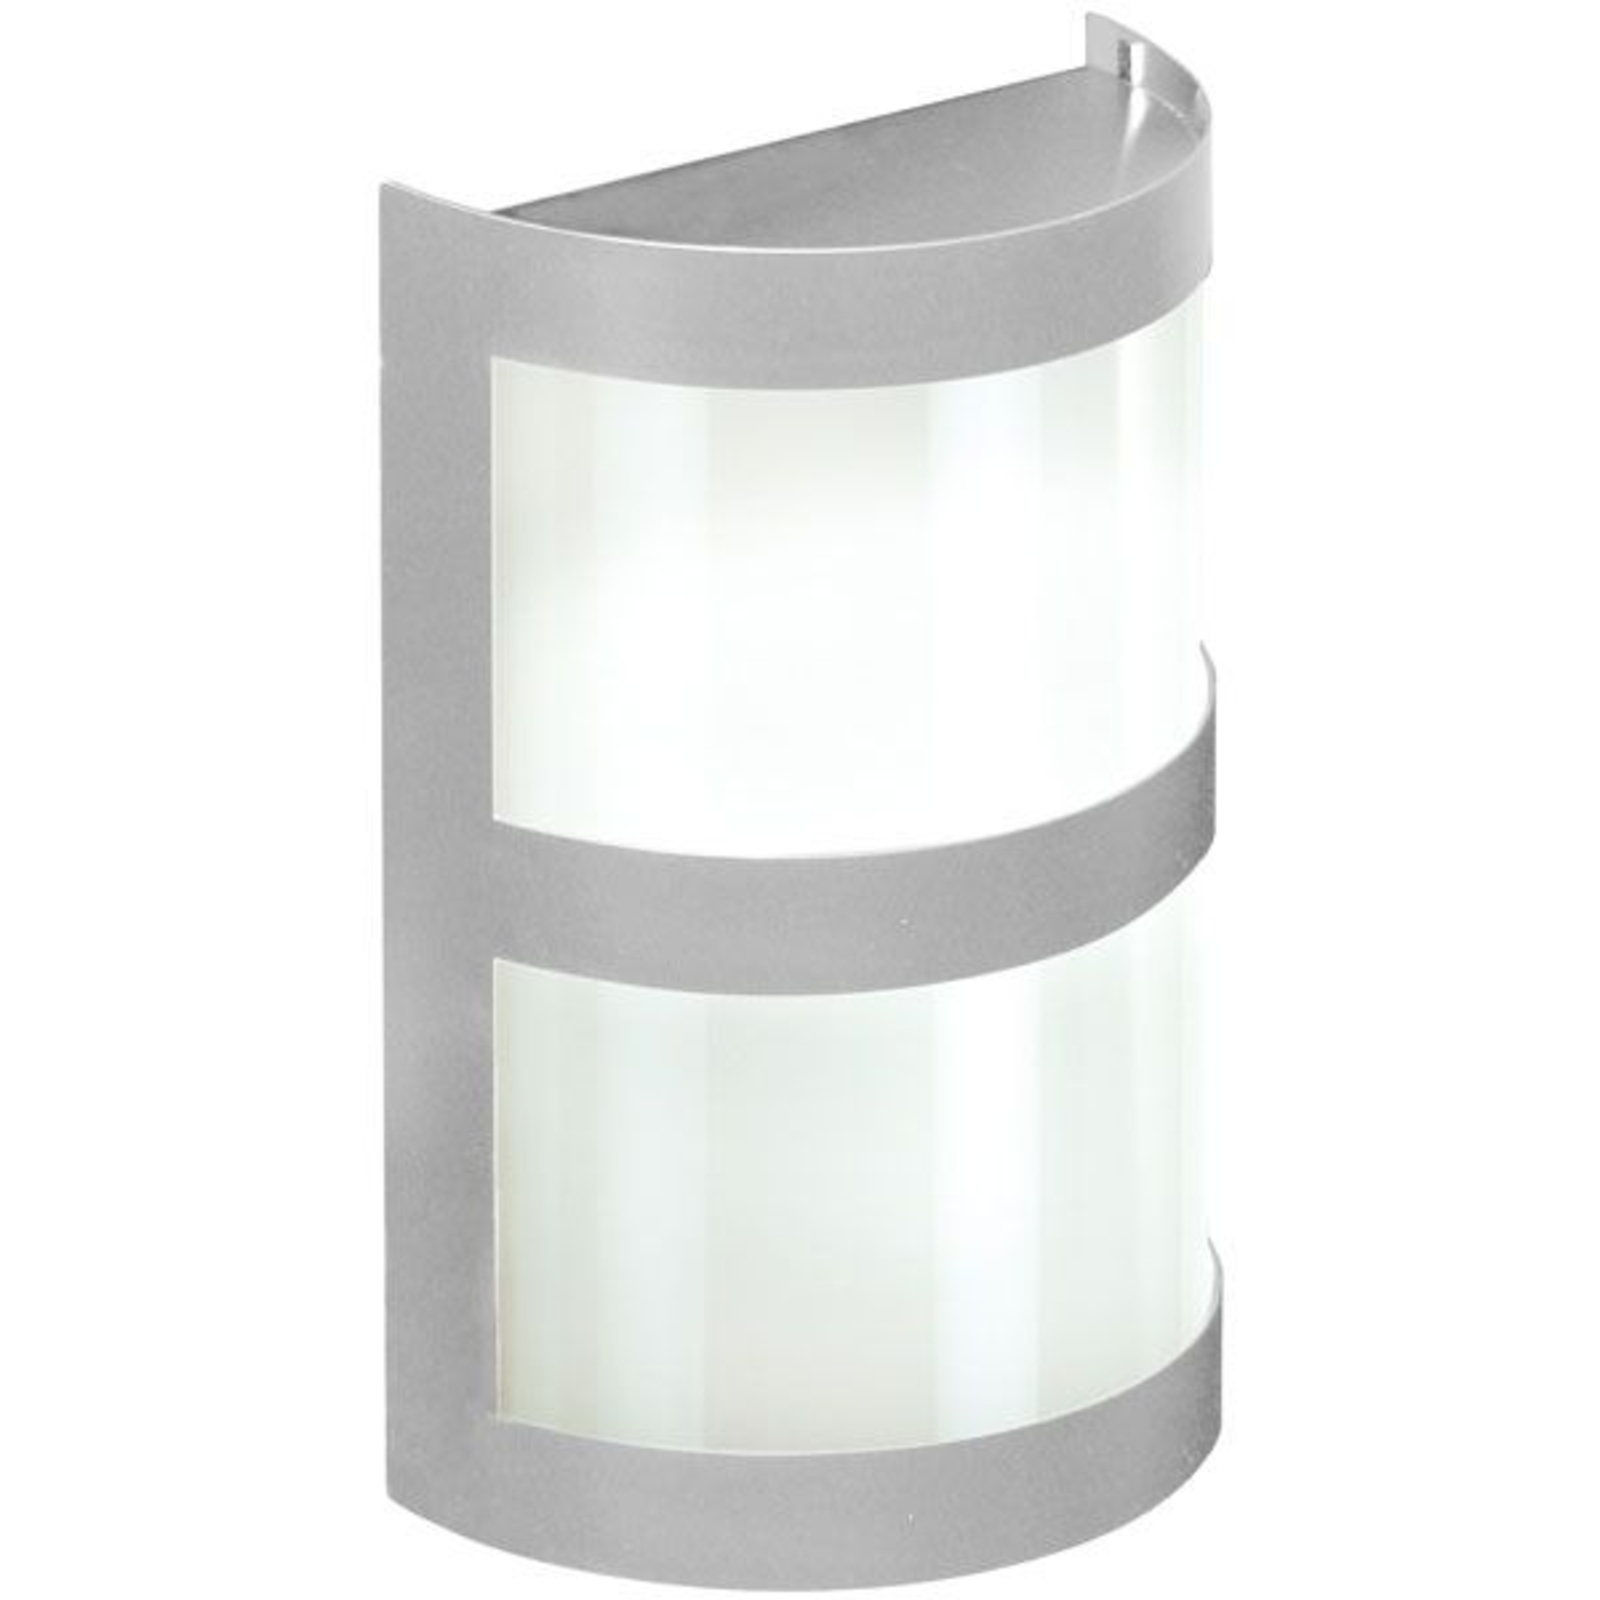 Wall lamp stainless steel - German production